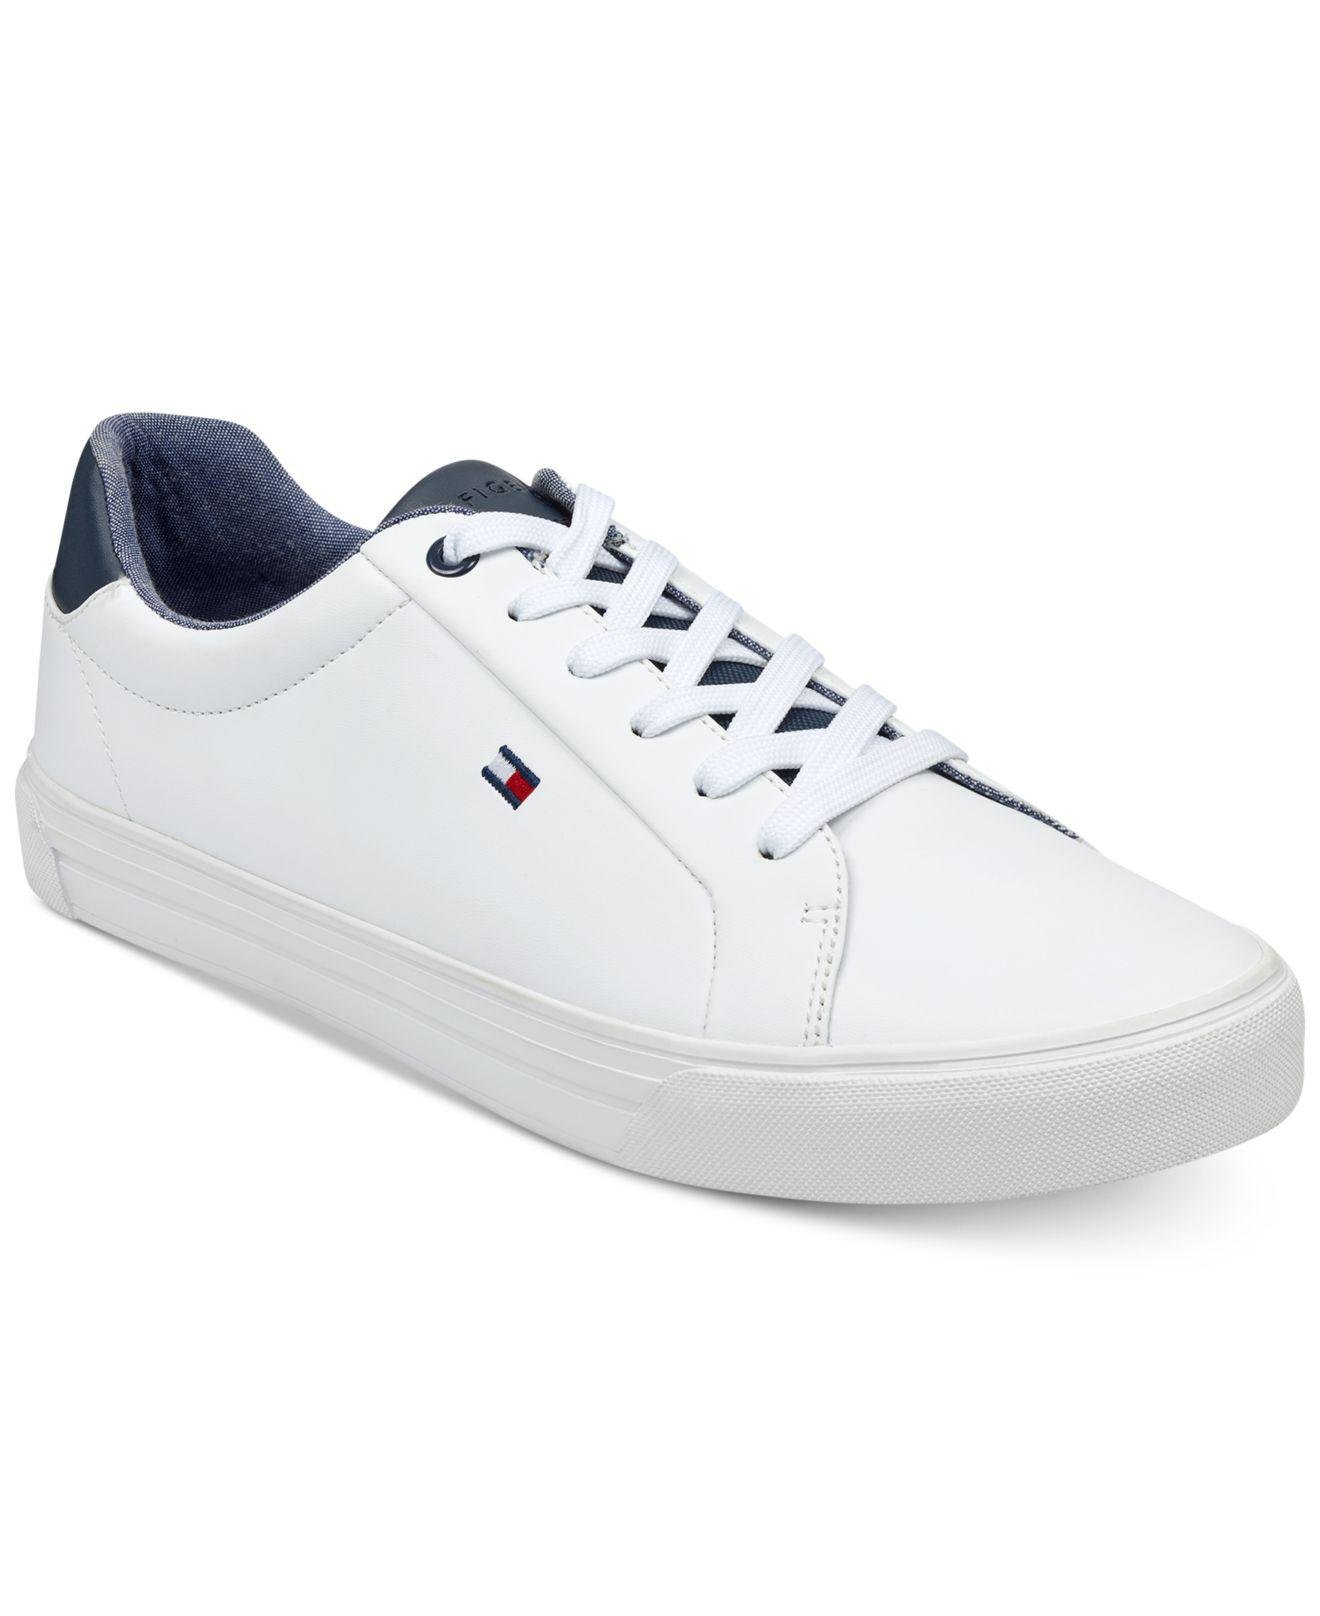 white shoes tommy hilfiger